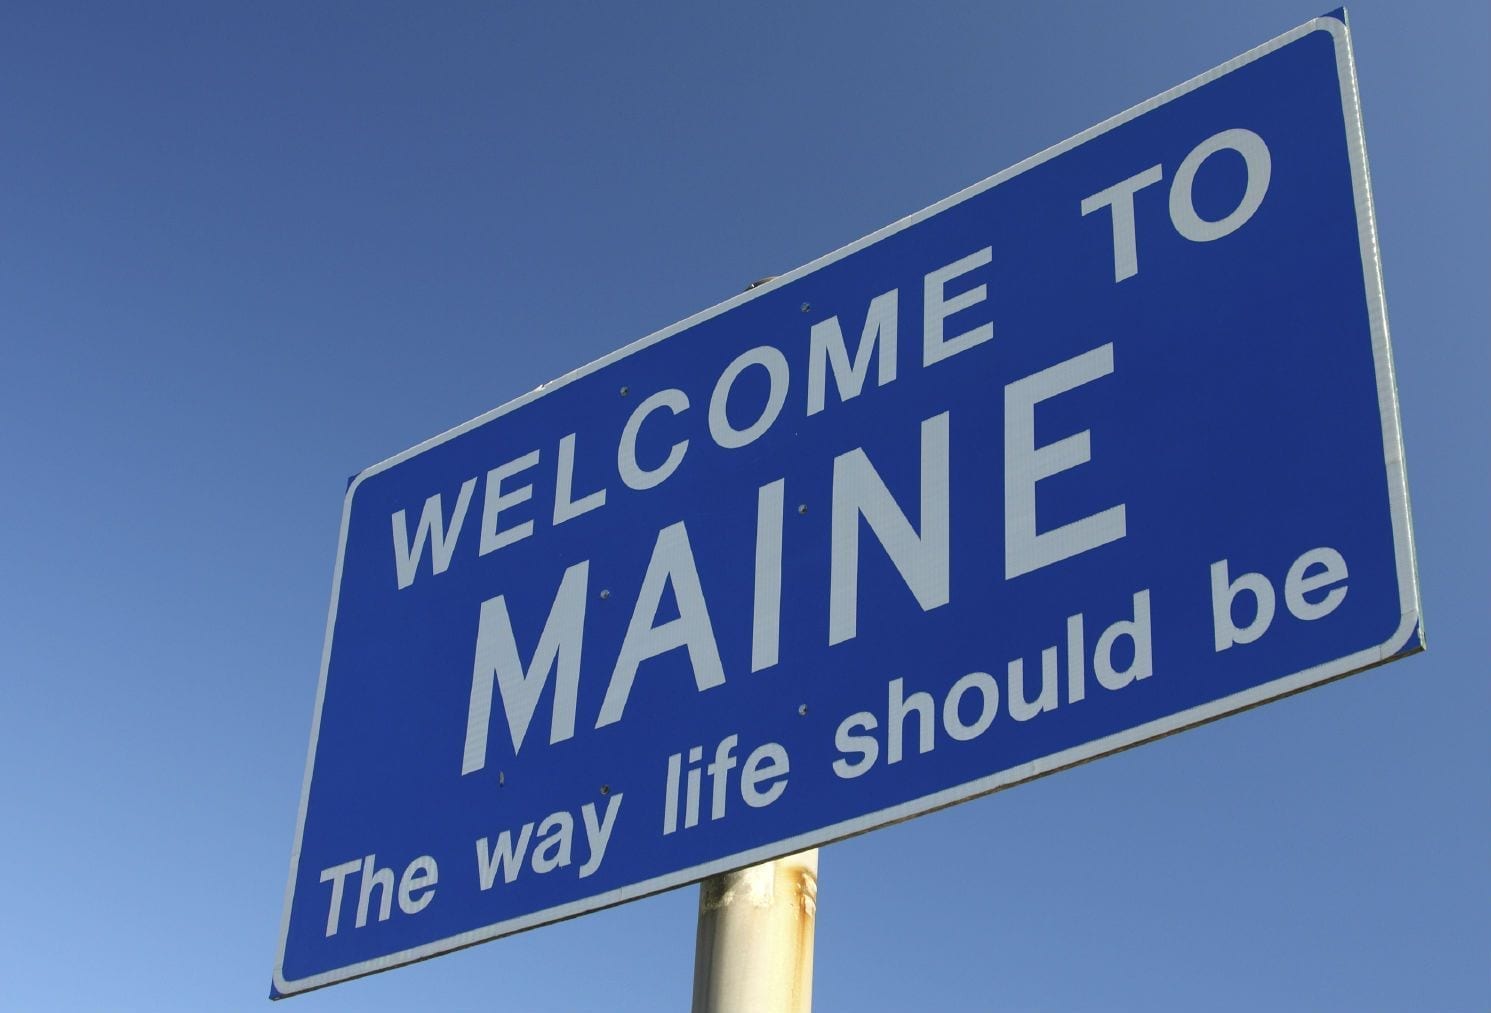 Maine Welcome sign